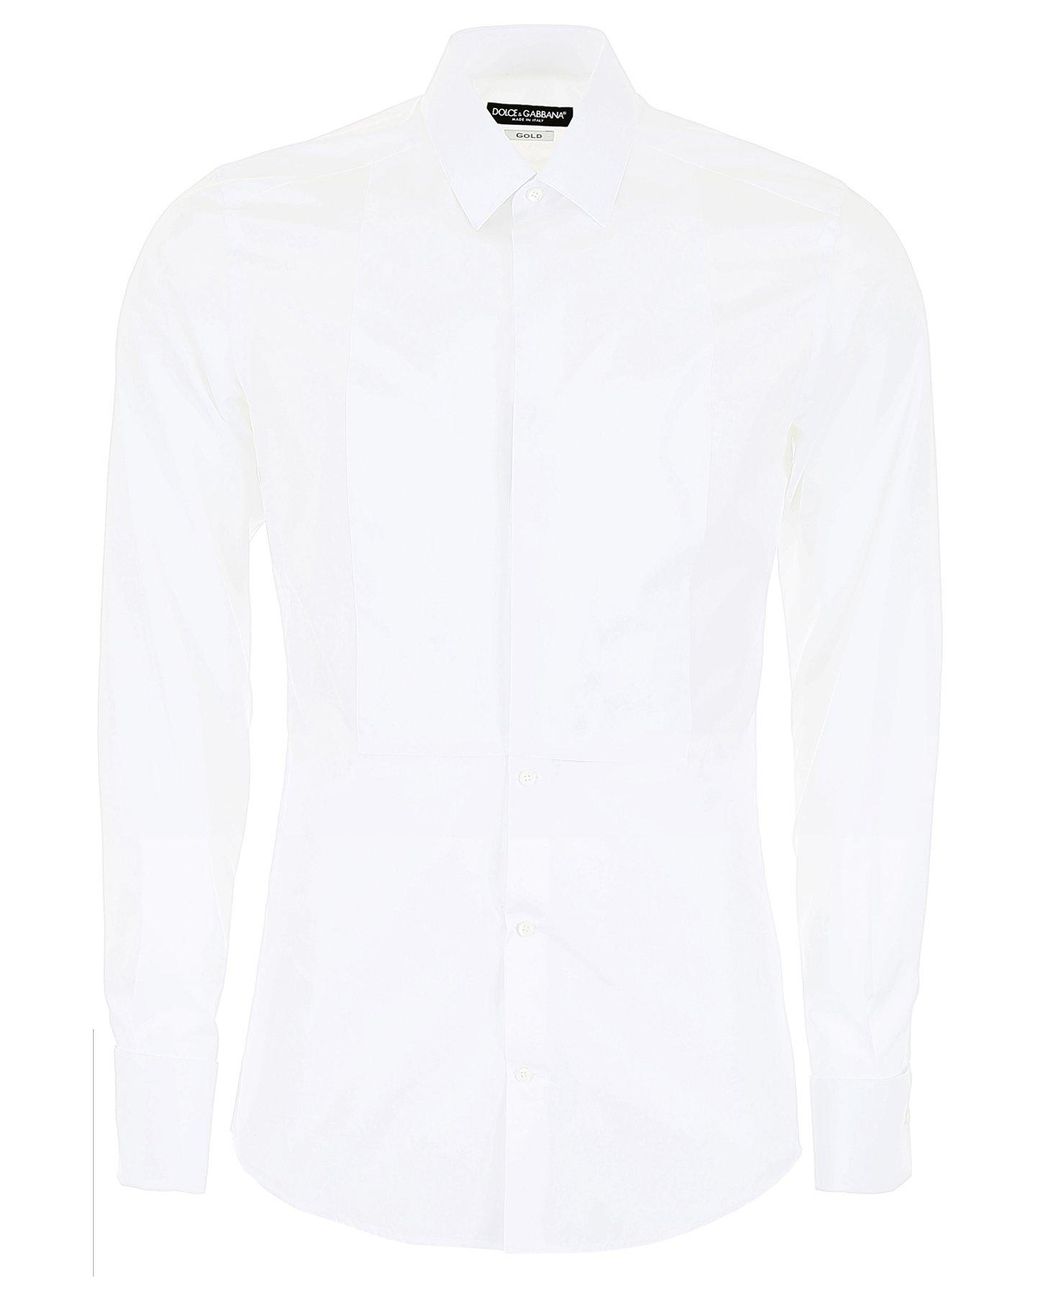 Dolce & Gabbana Button-up Shirt in White for Men - Lyst